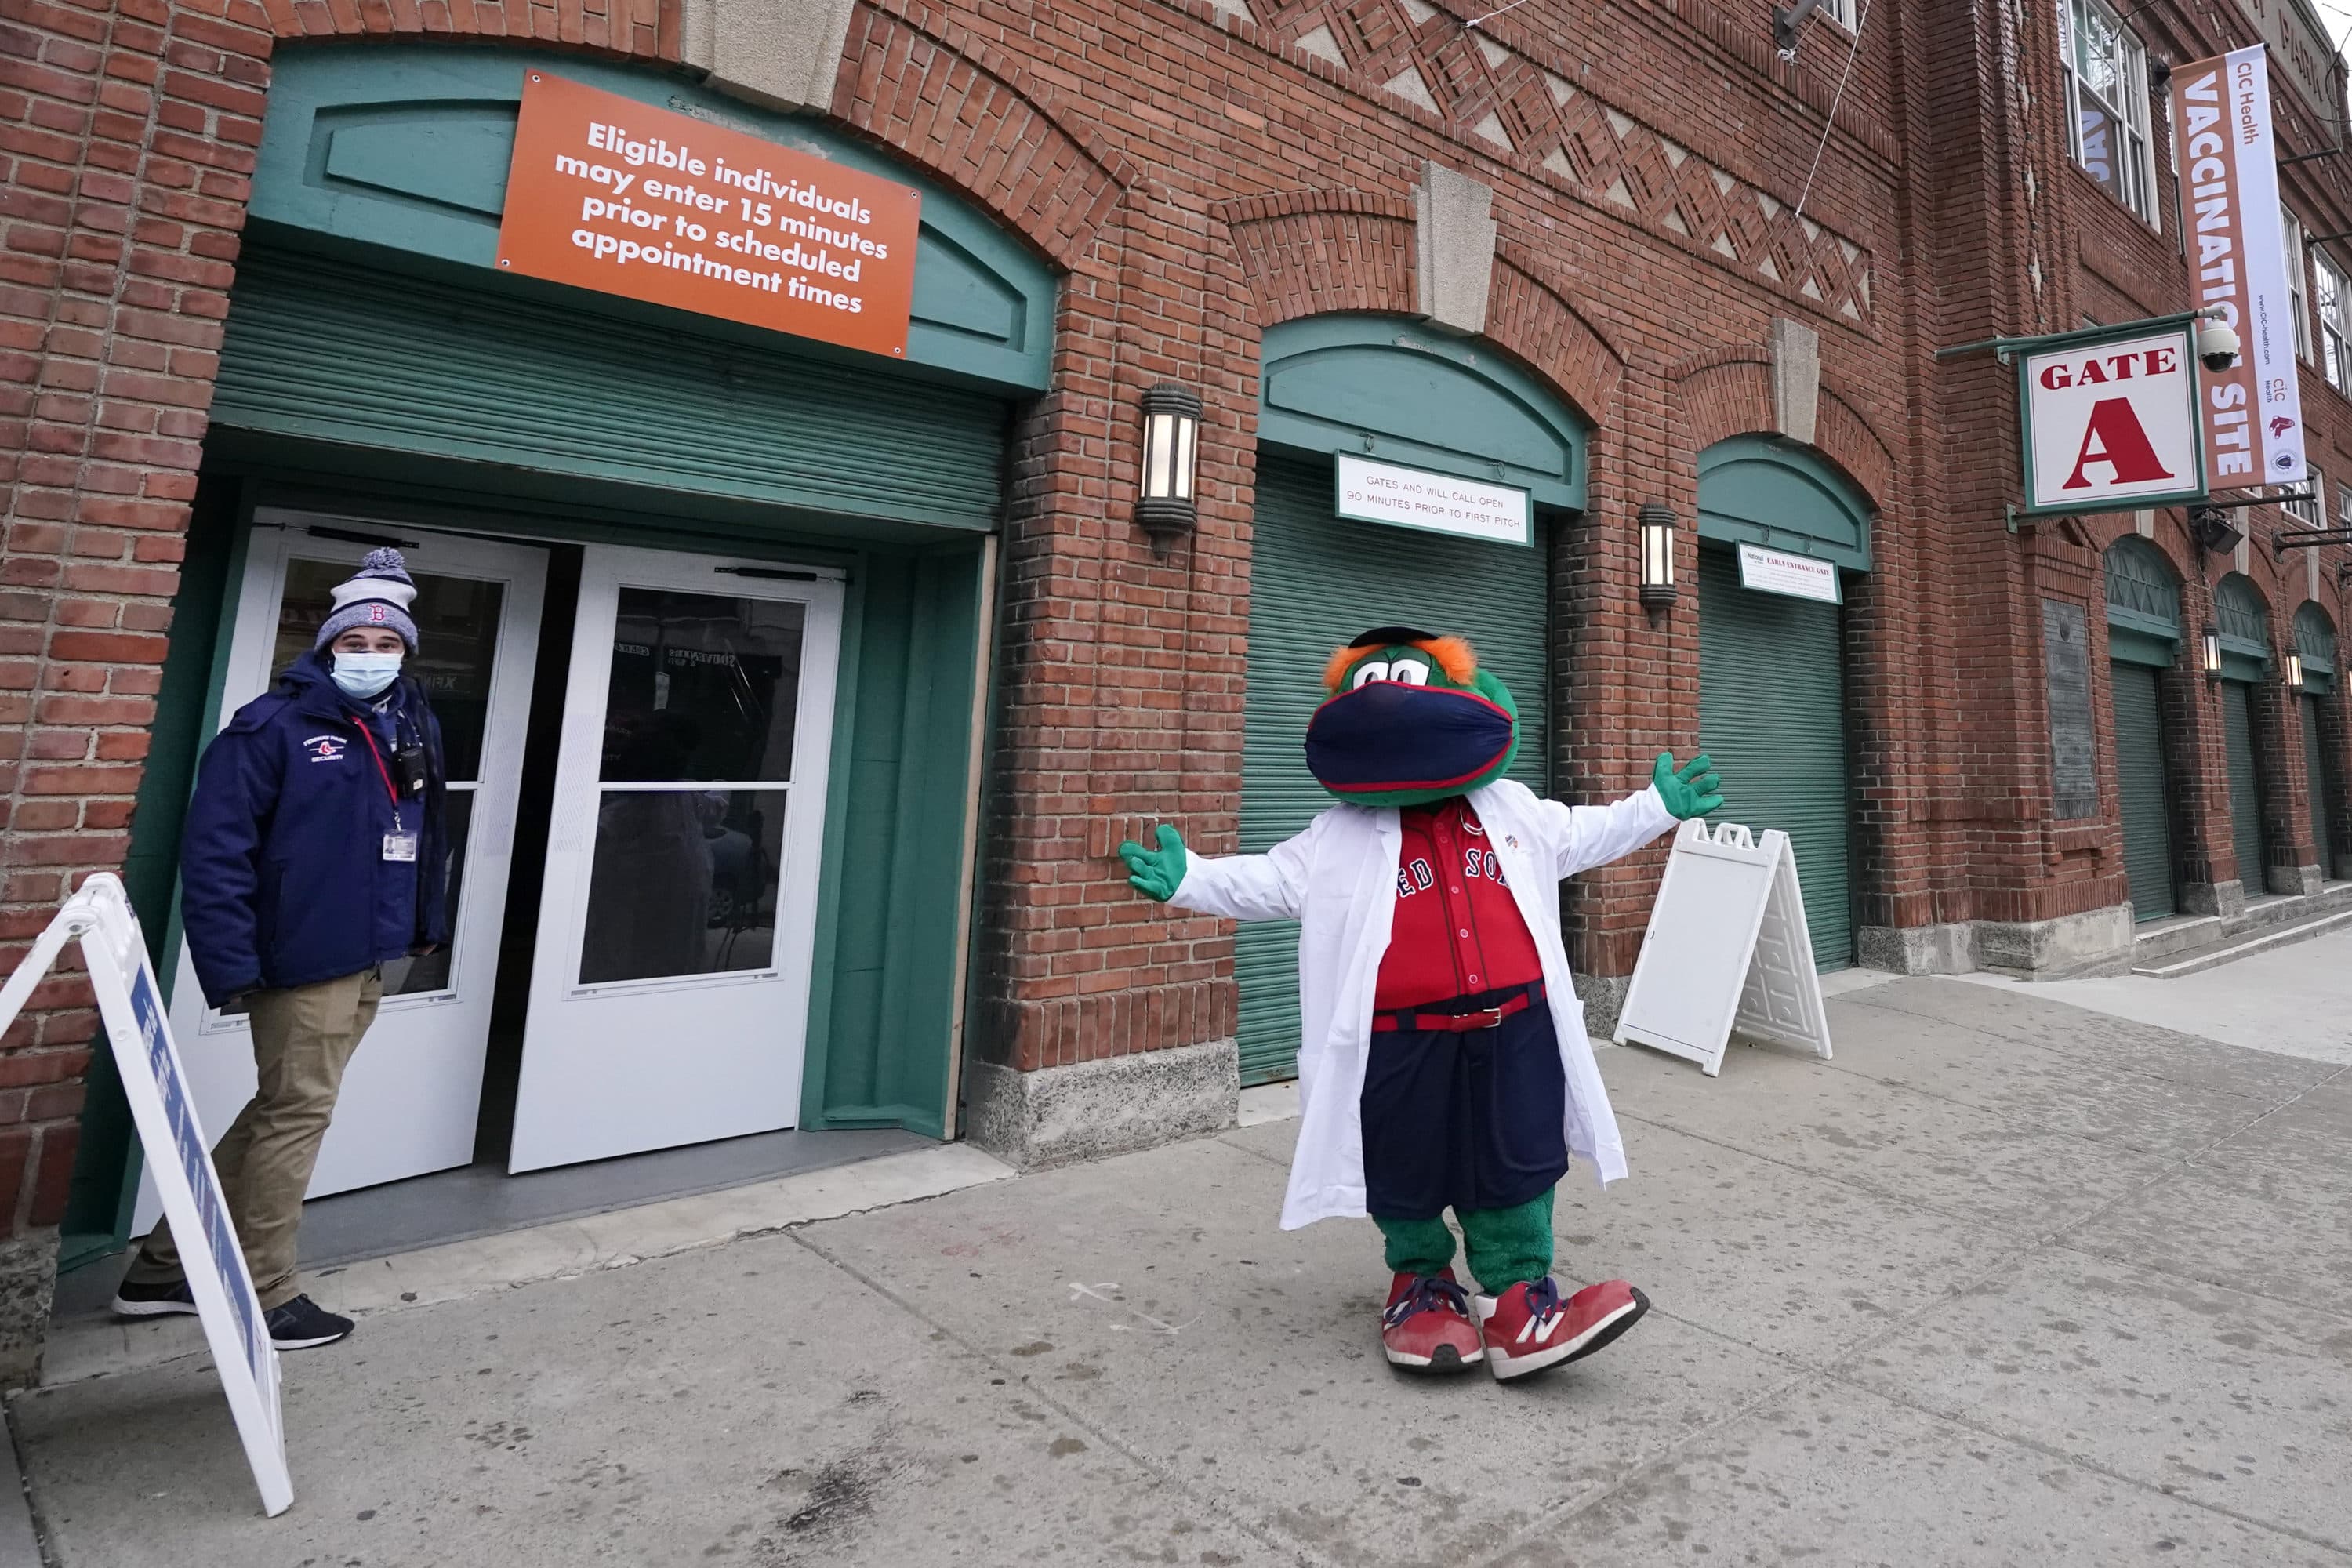 Boston Red Sox mascot, Wally the Green Monster, gestures while dressed in a medical white coat outside Fenway Park, Monday Feb. 1, 2021, in Boston. Fenway Park is one of several large COVID-19 vaccination sites in the Boston area. (Elise Amendola/AP)